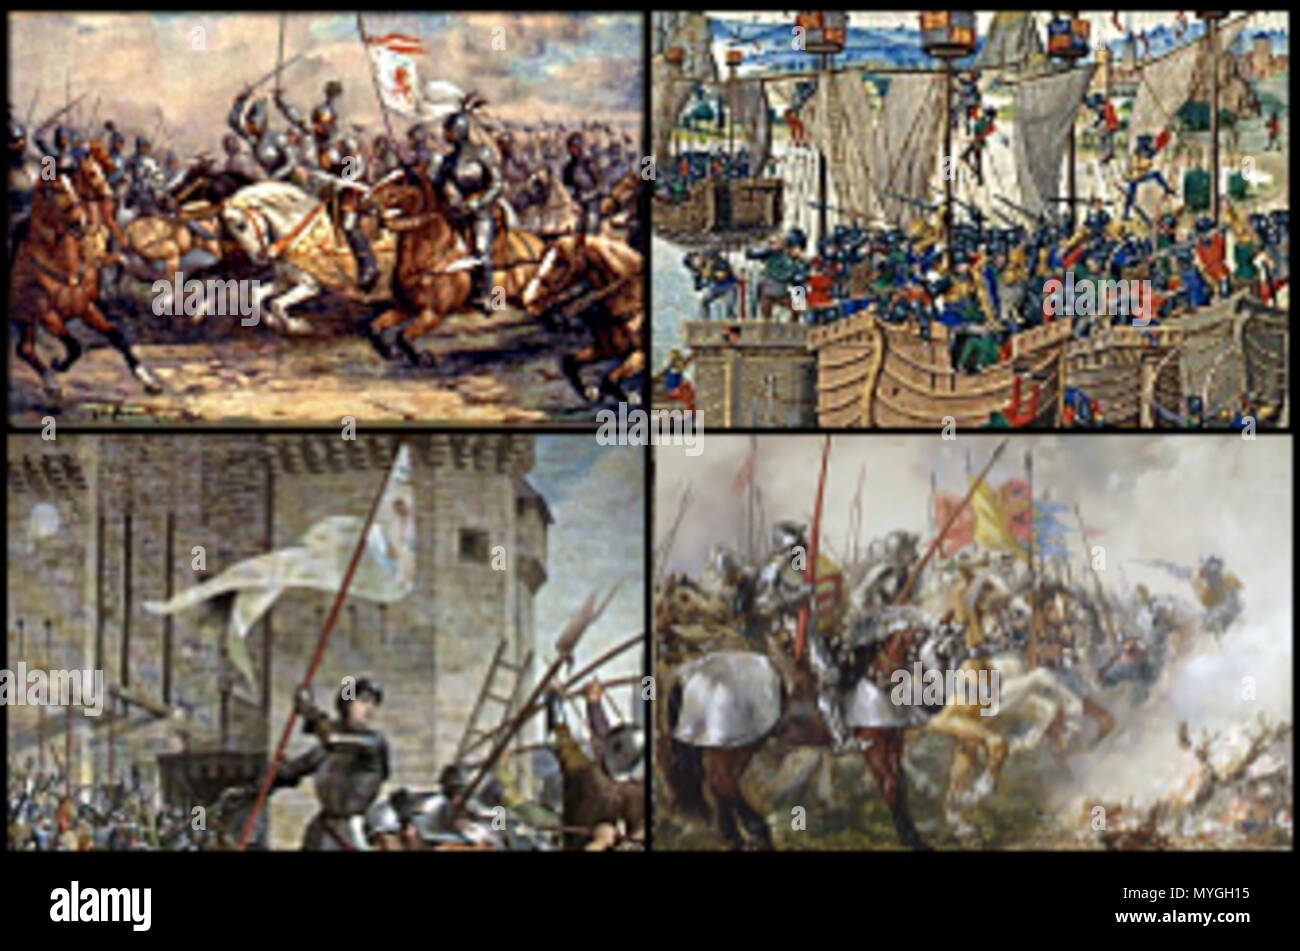 . Montage of paintings representing key battles of the Hundred Years' War. Clockwise, from top left: Crécy, La Rochelle, Agincourt, Orléans. 6 March 2010. See images below. 249 Hundred Years' War montage Stock Photo